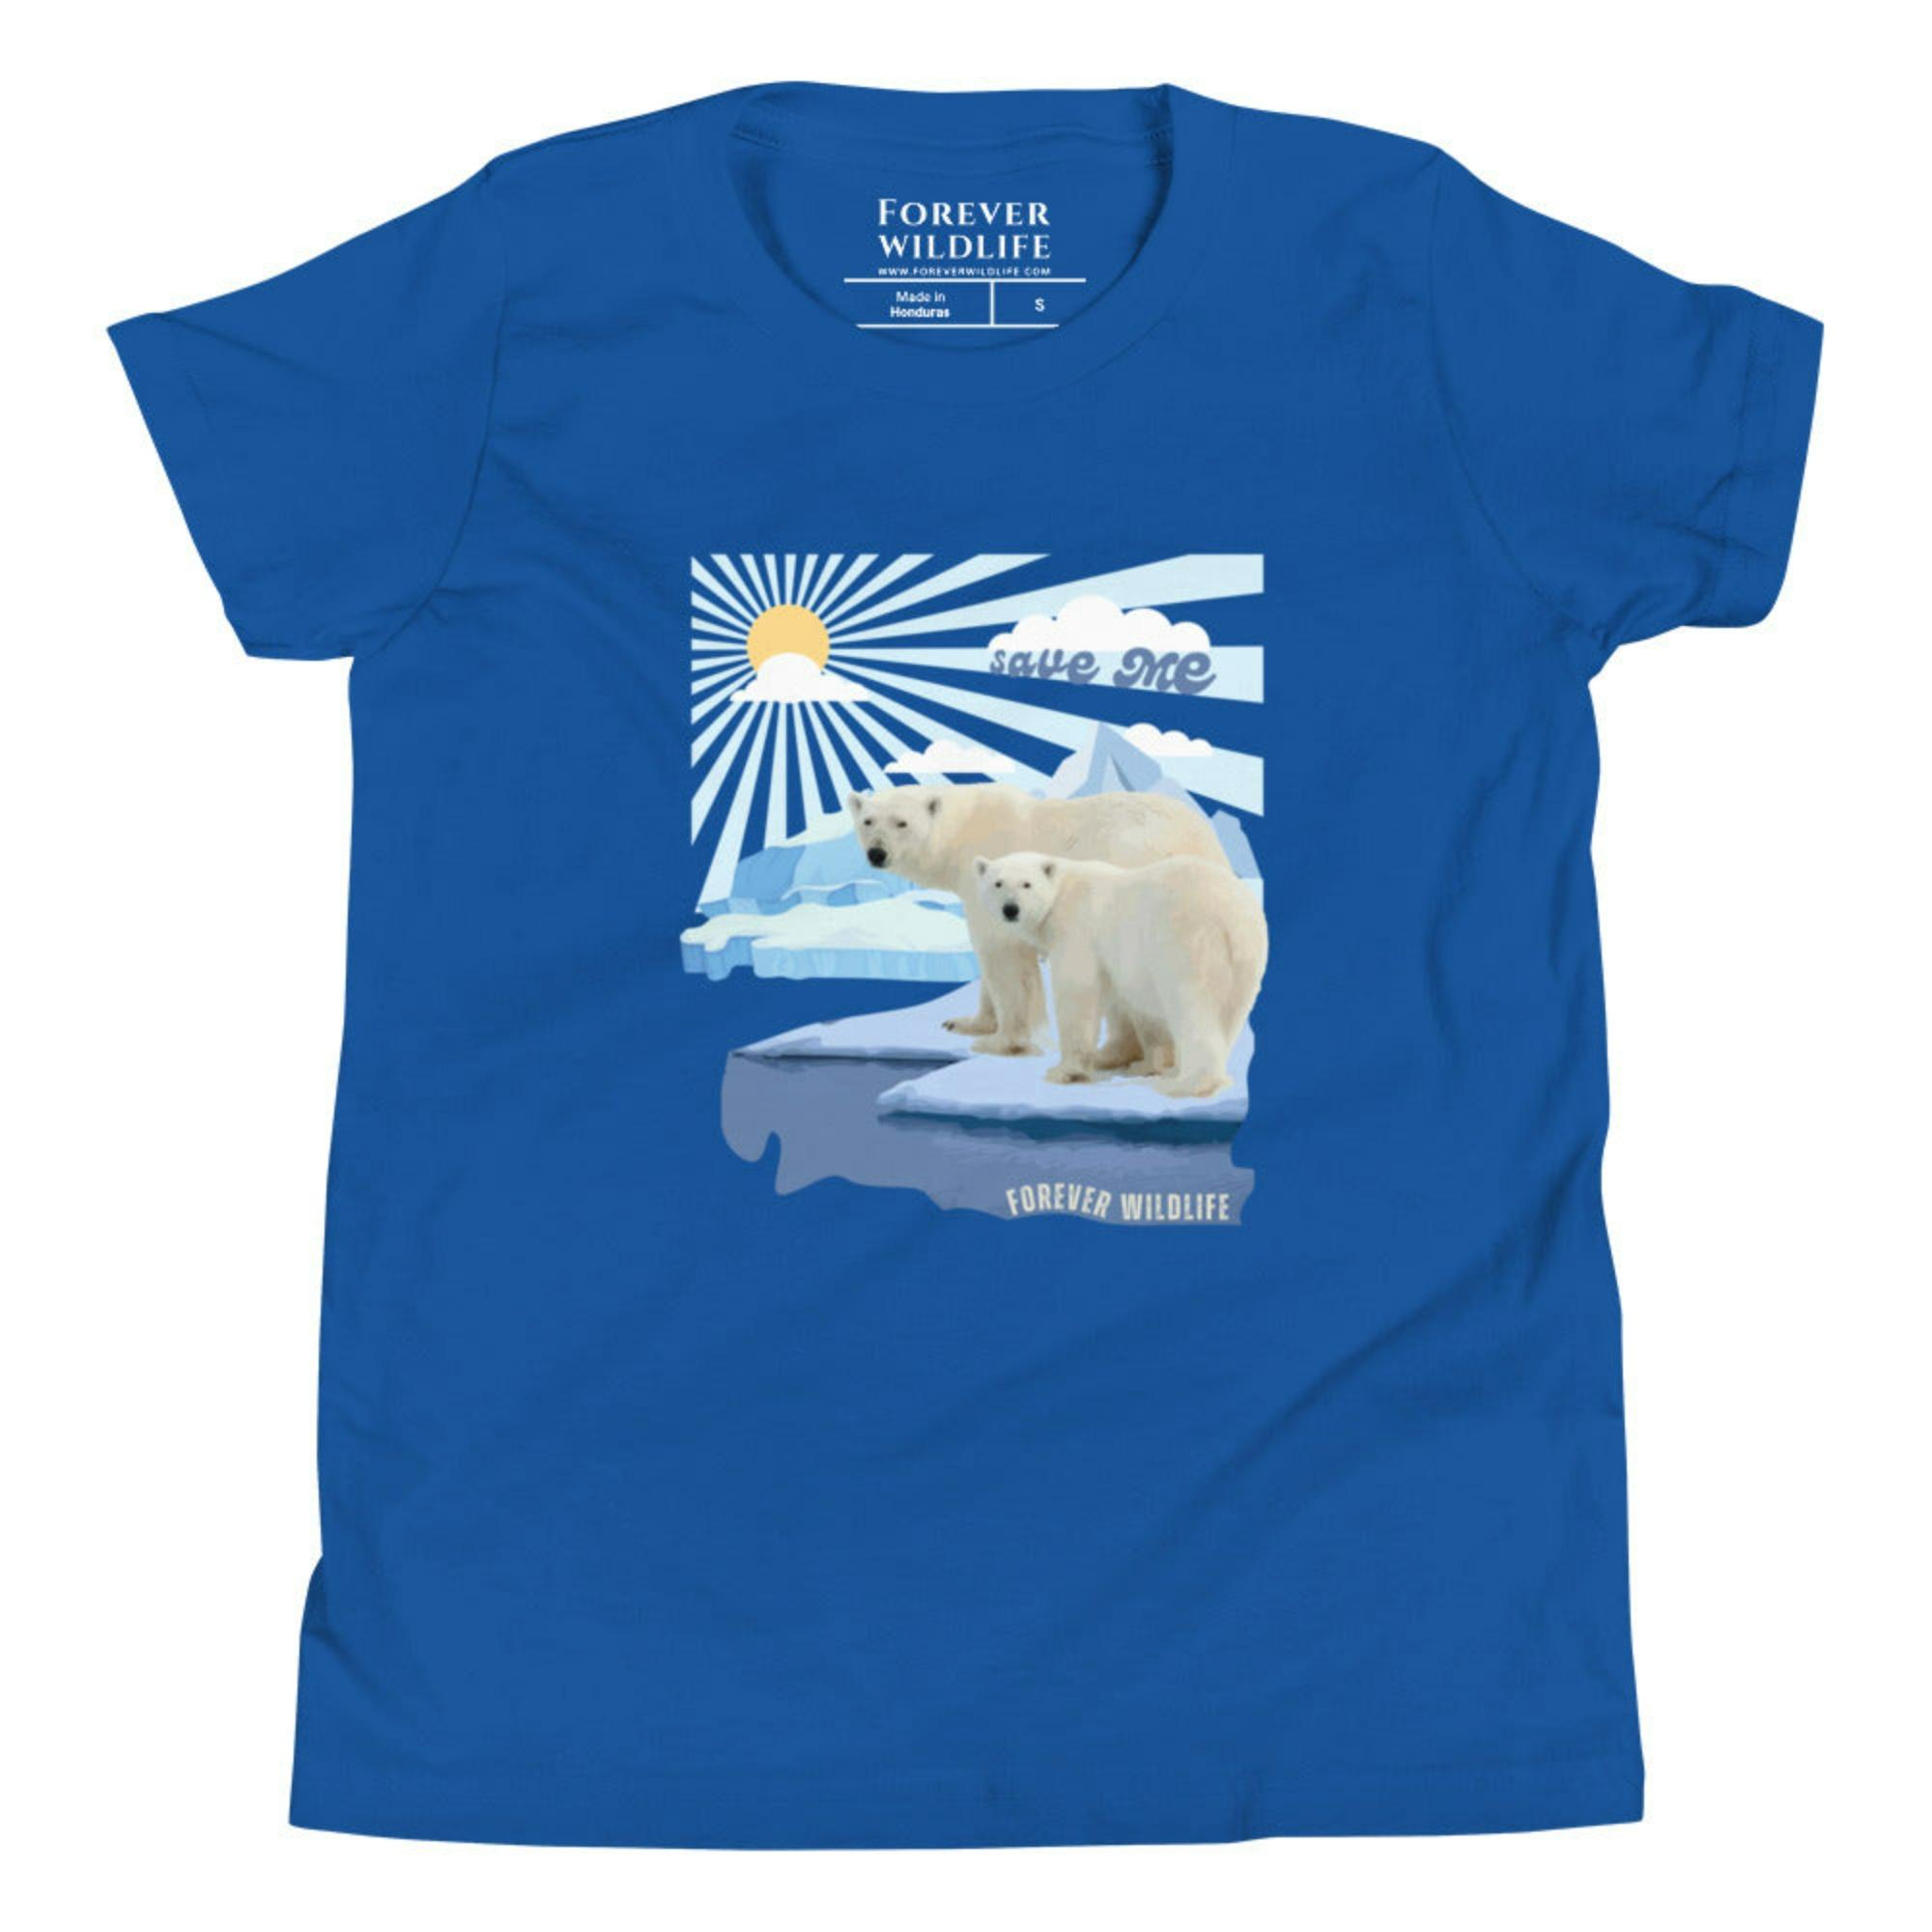 Royal Blue Youth T-Shirt with Polar Bears graphic as part of Wildlife T Shirts, Wildlife Clothing & Apparel by Forever Wildlife